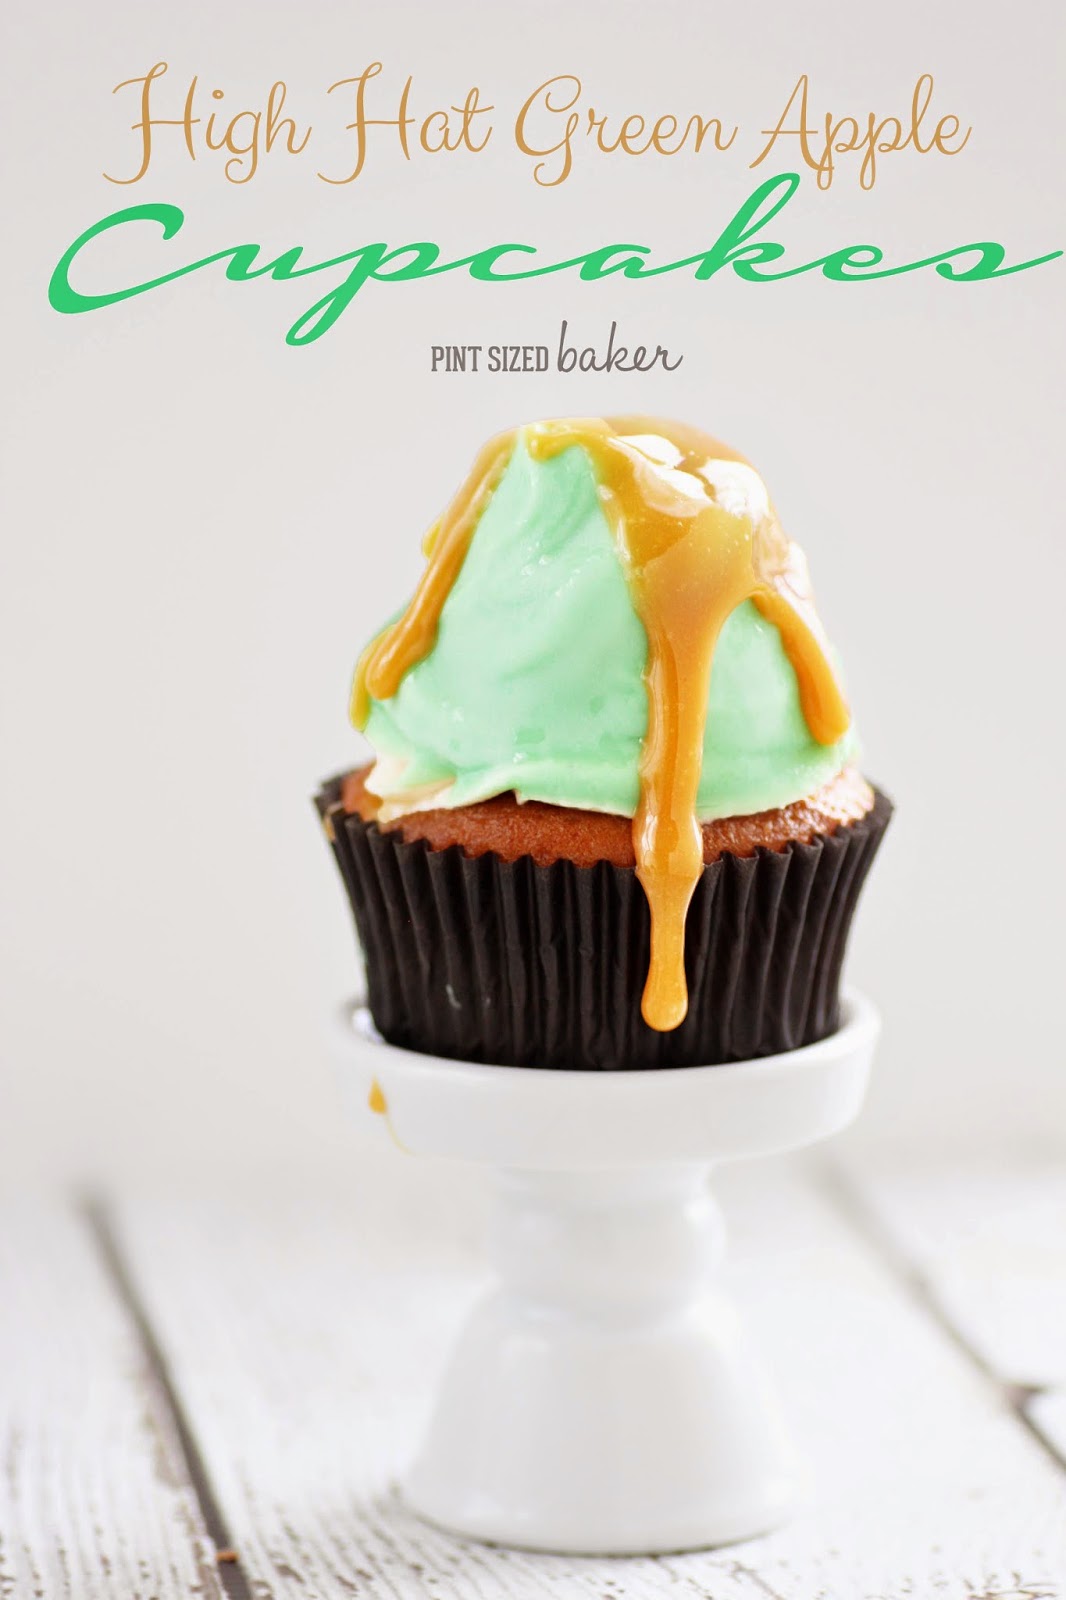 Green Apple High Hat Cupcakes are perfect for an easy fall treat!